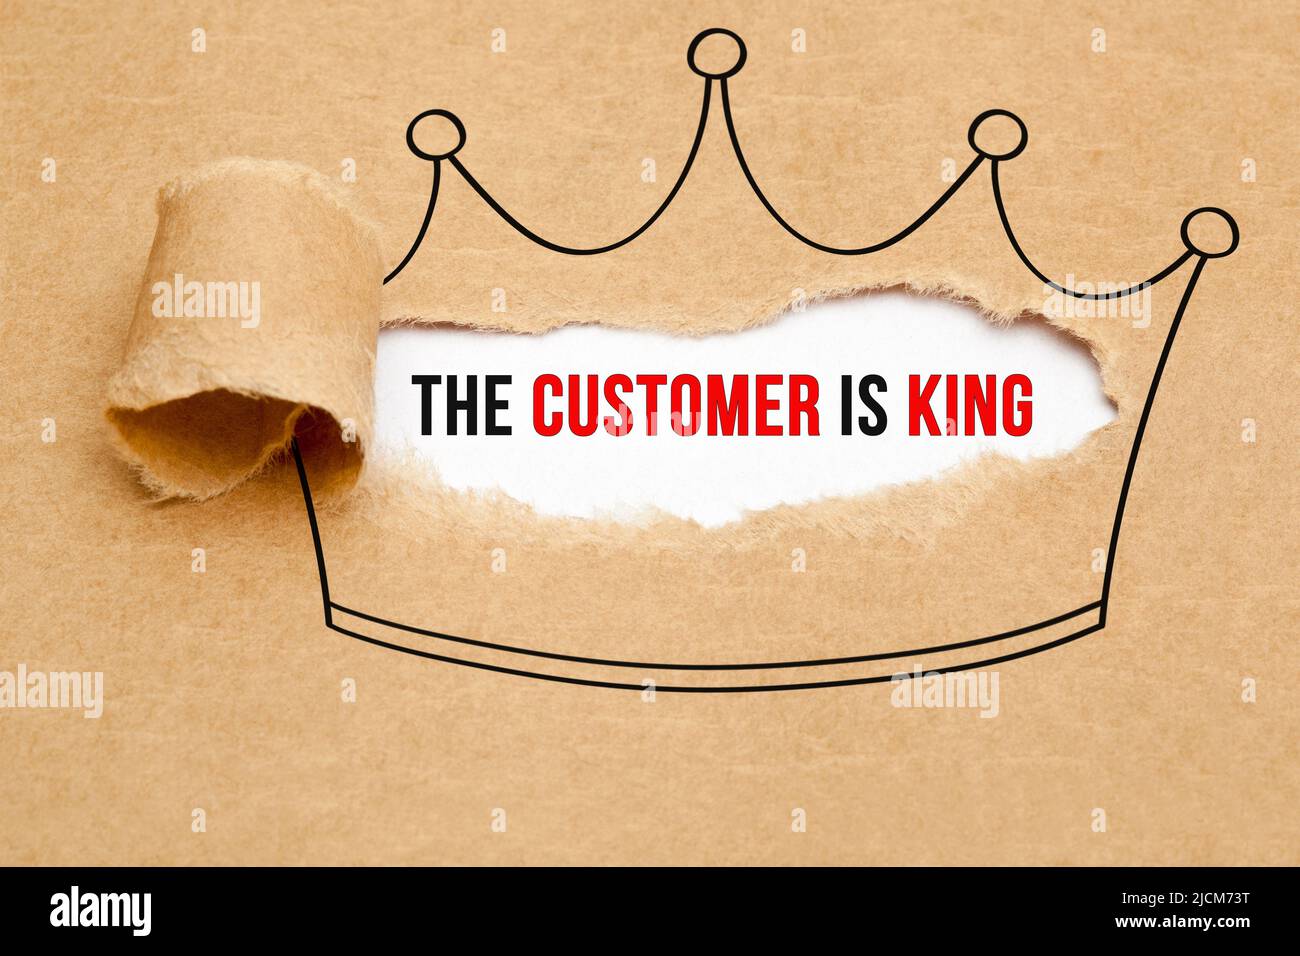 Slogan The Customer Is King appearing behind torn brown paper. Customer satisfaction business concept. Stock Photo